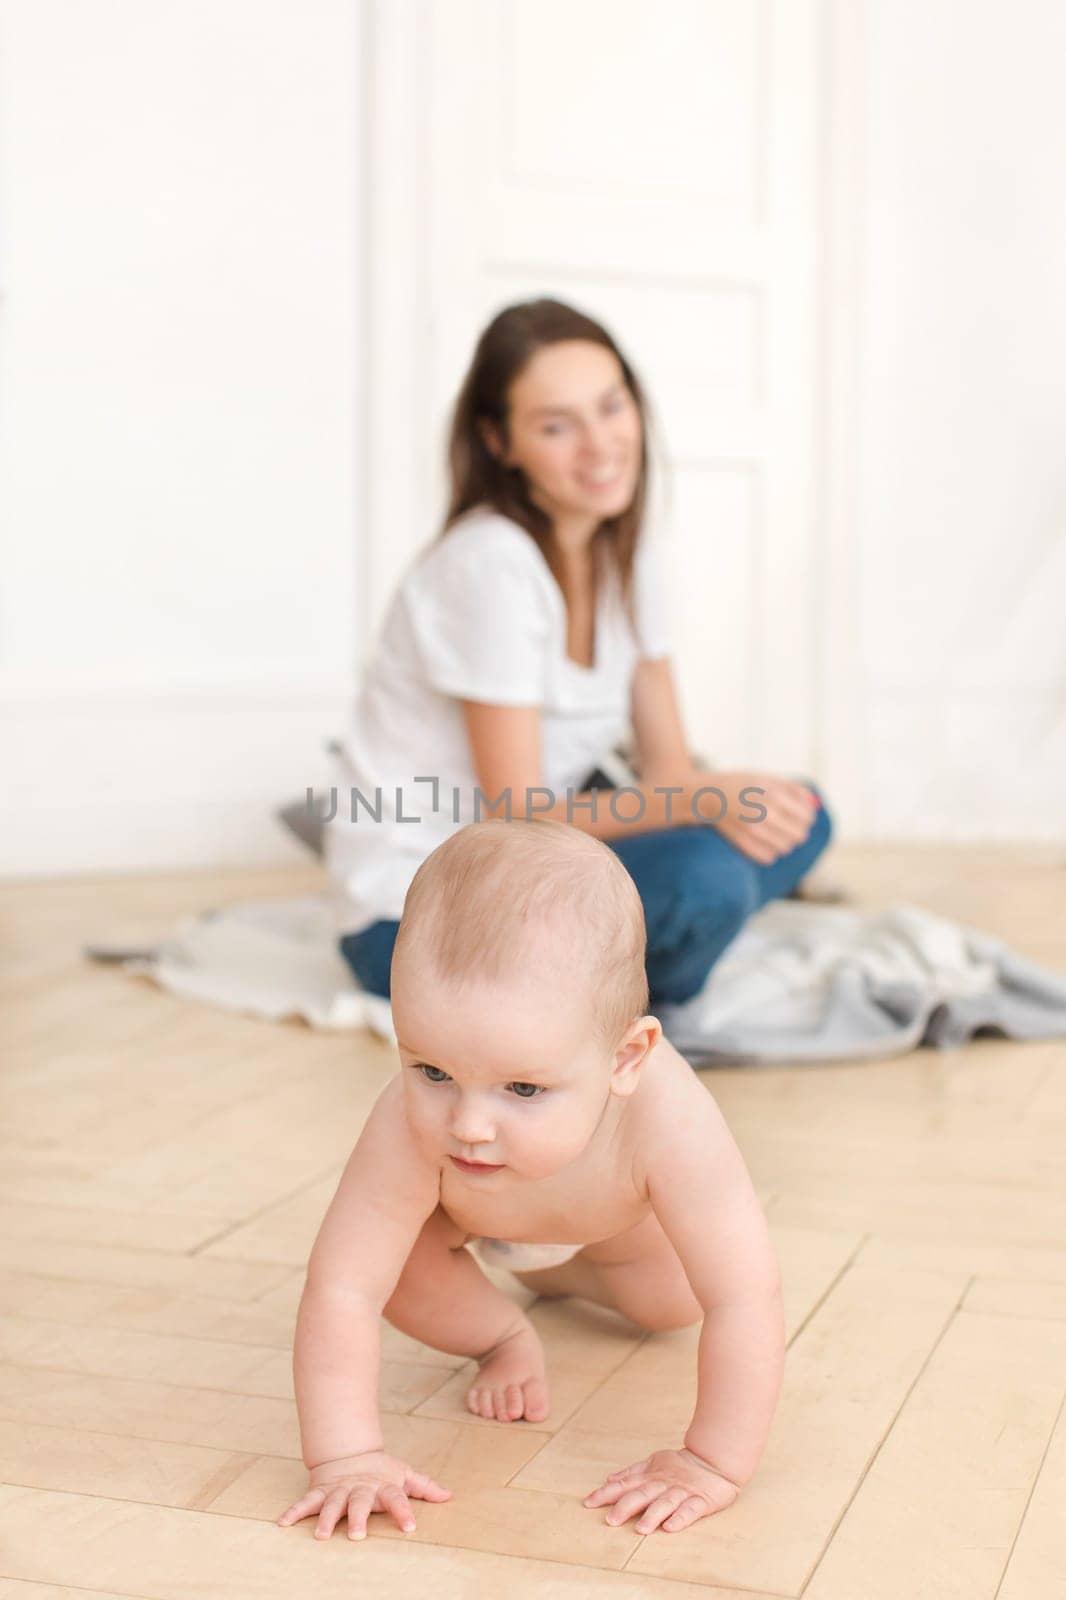 Woman watching baby crawling on floor by Demkat